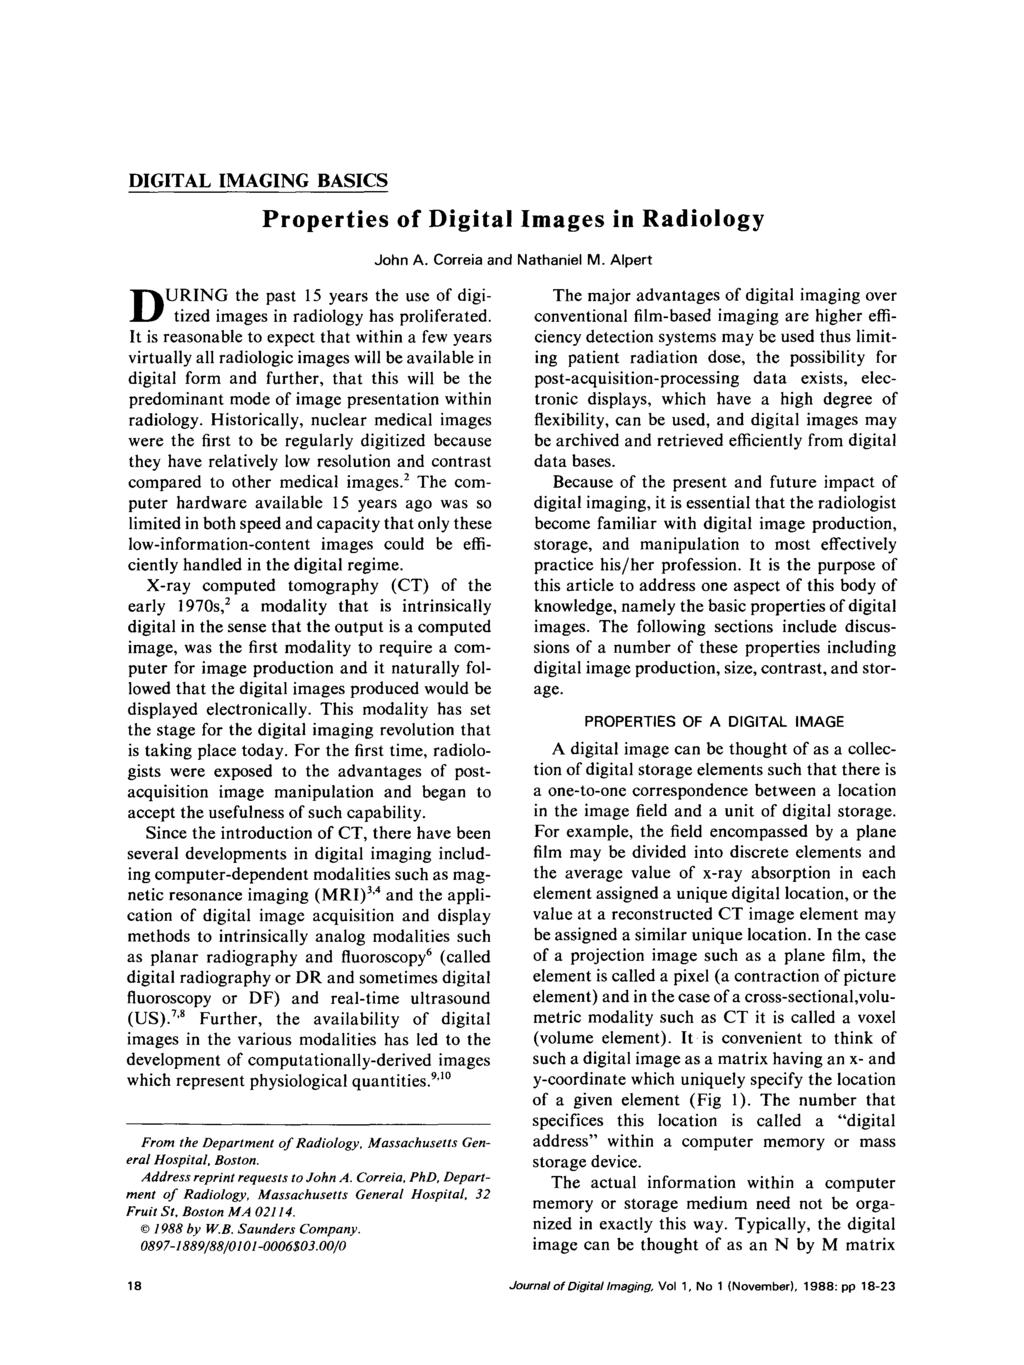 DIGITAL IMAGING BASICS Properties of Digital Images in Radiology DURING the past 15 years the use of digitized images in radiology has proliferated.